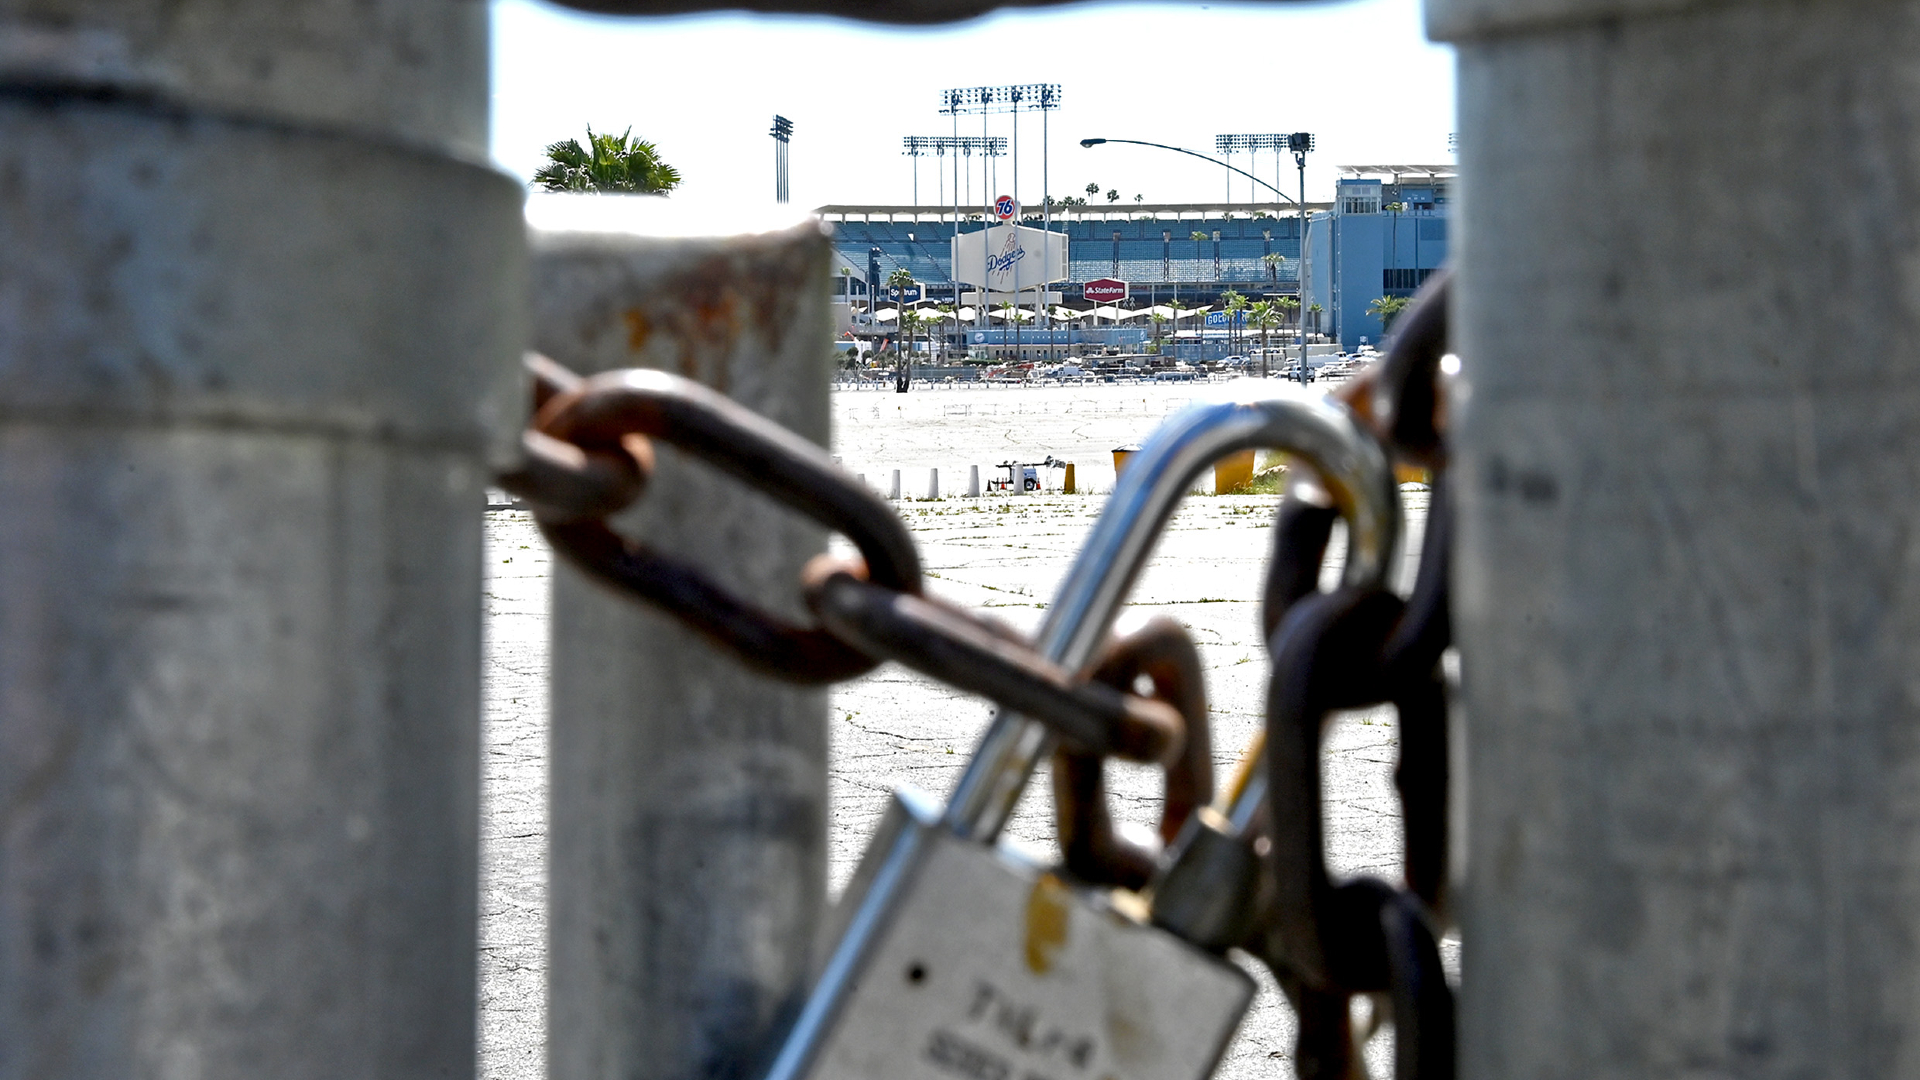 A lock on the gate at Dodger Stadium